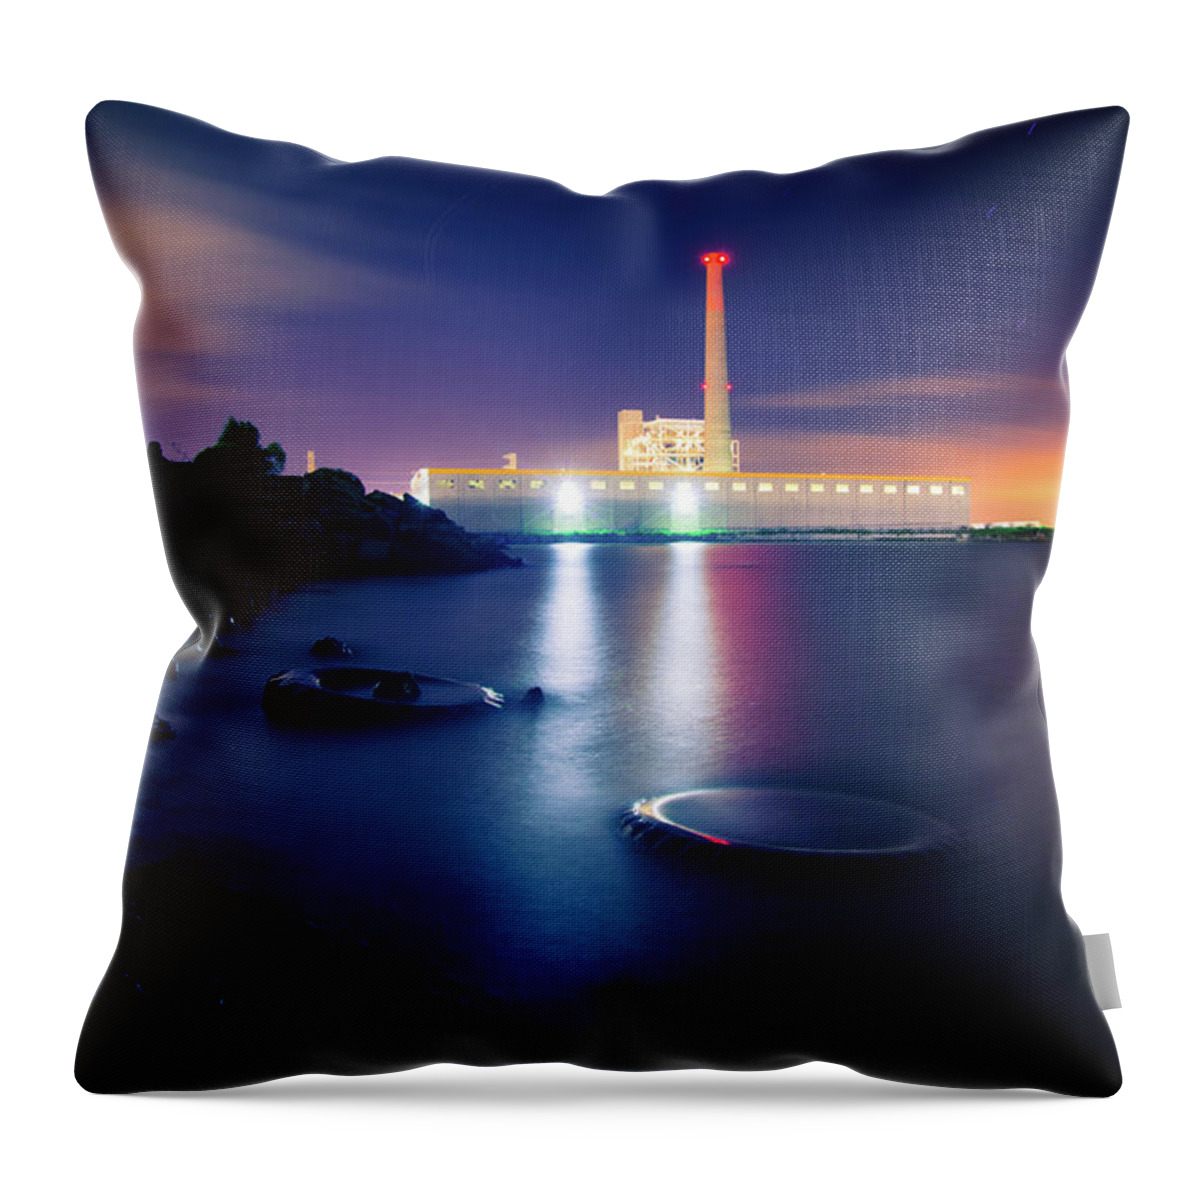 Industrial District Throw Pillow featuring the photograph Toxic Beach With Power Plant by Hal Bergman